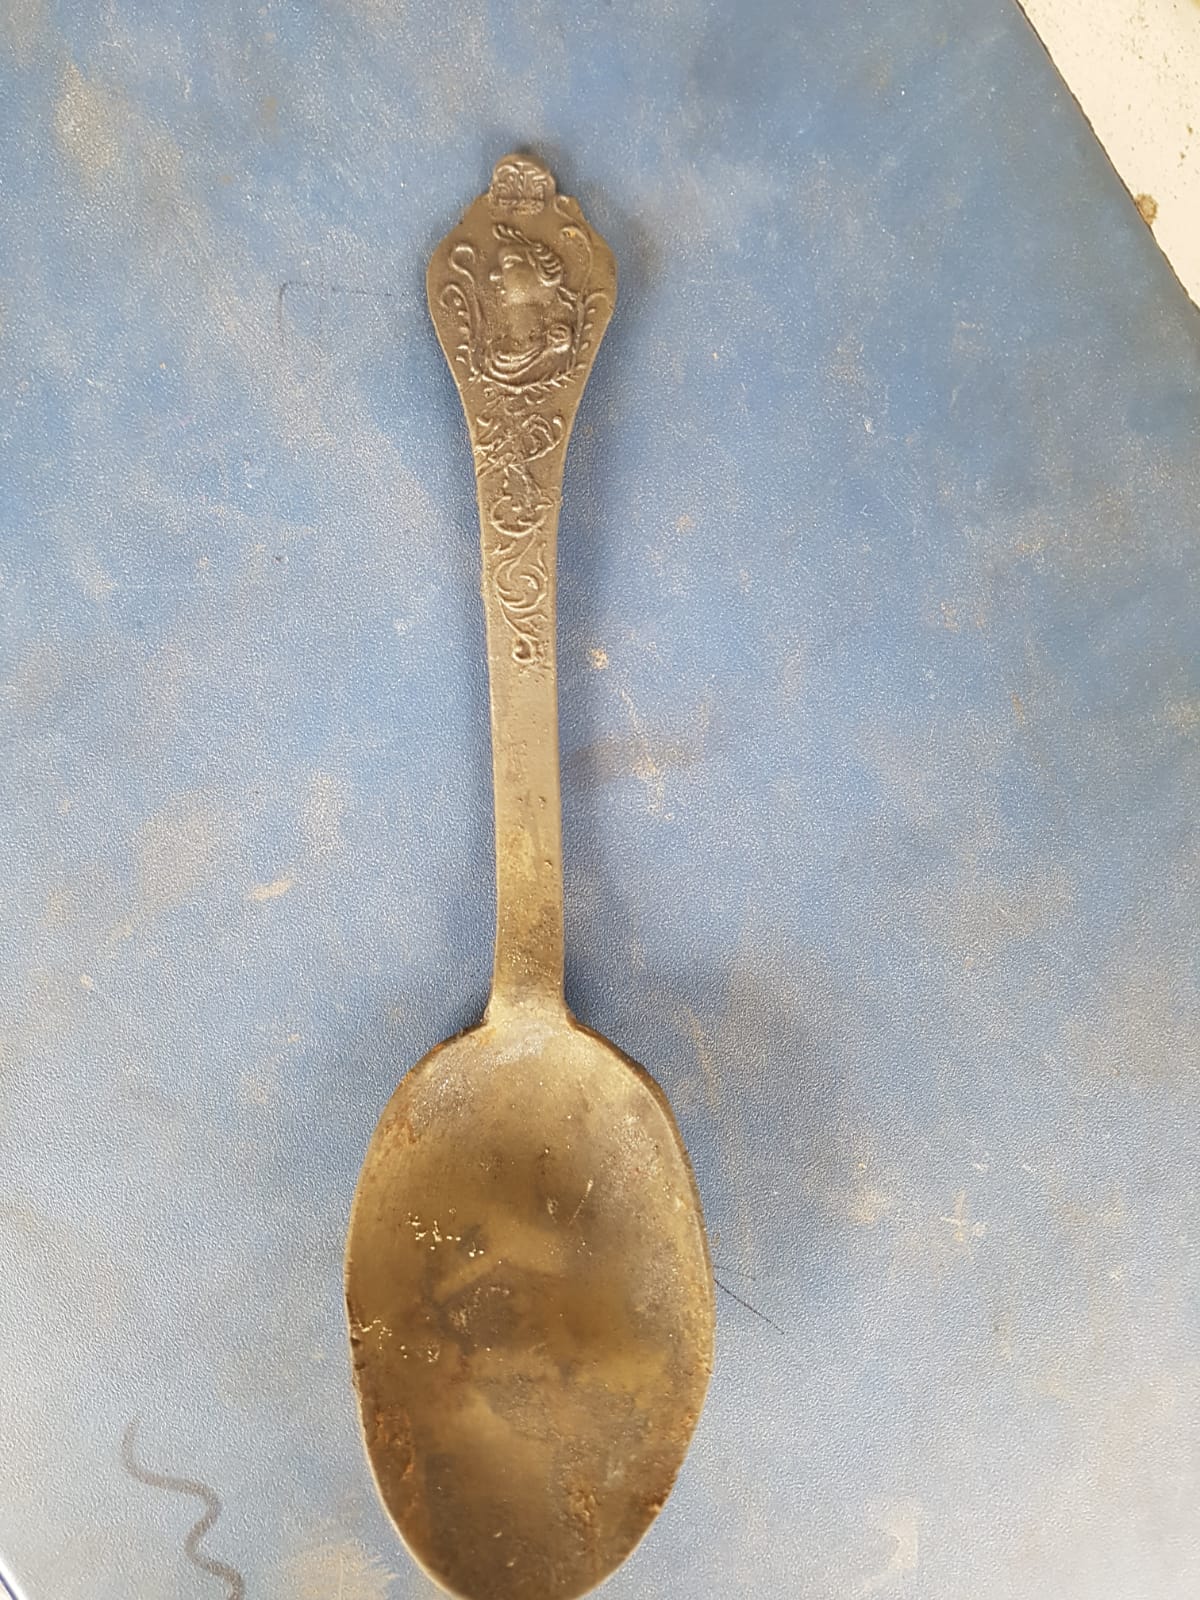 Two Rare Royal Portrait Spoons Found In Ship Wreck News Articles